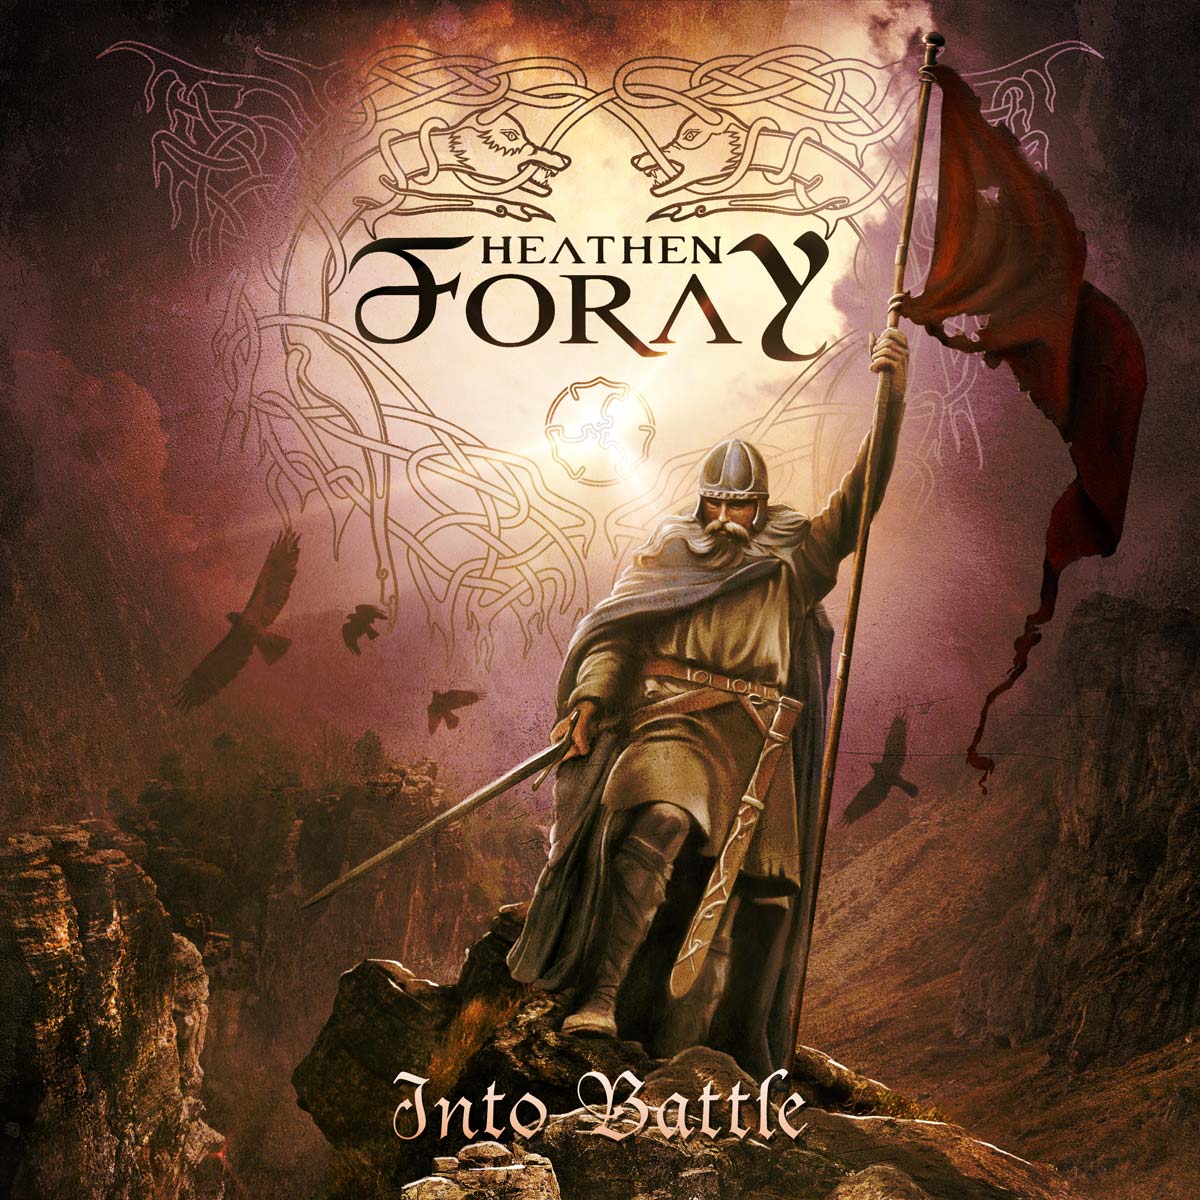 Cover of Into Battle by Heathen Foray